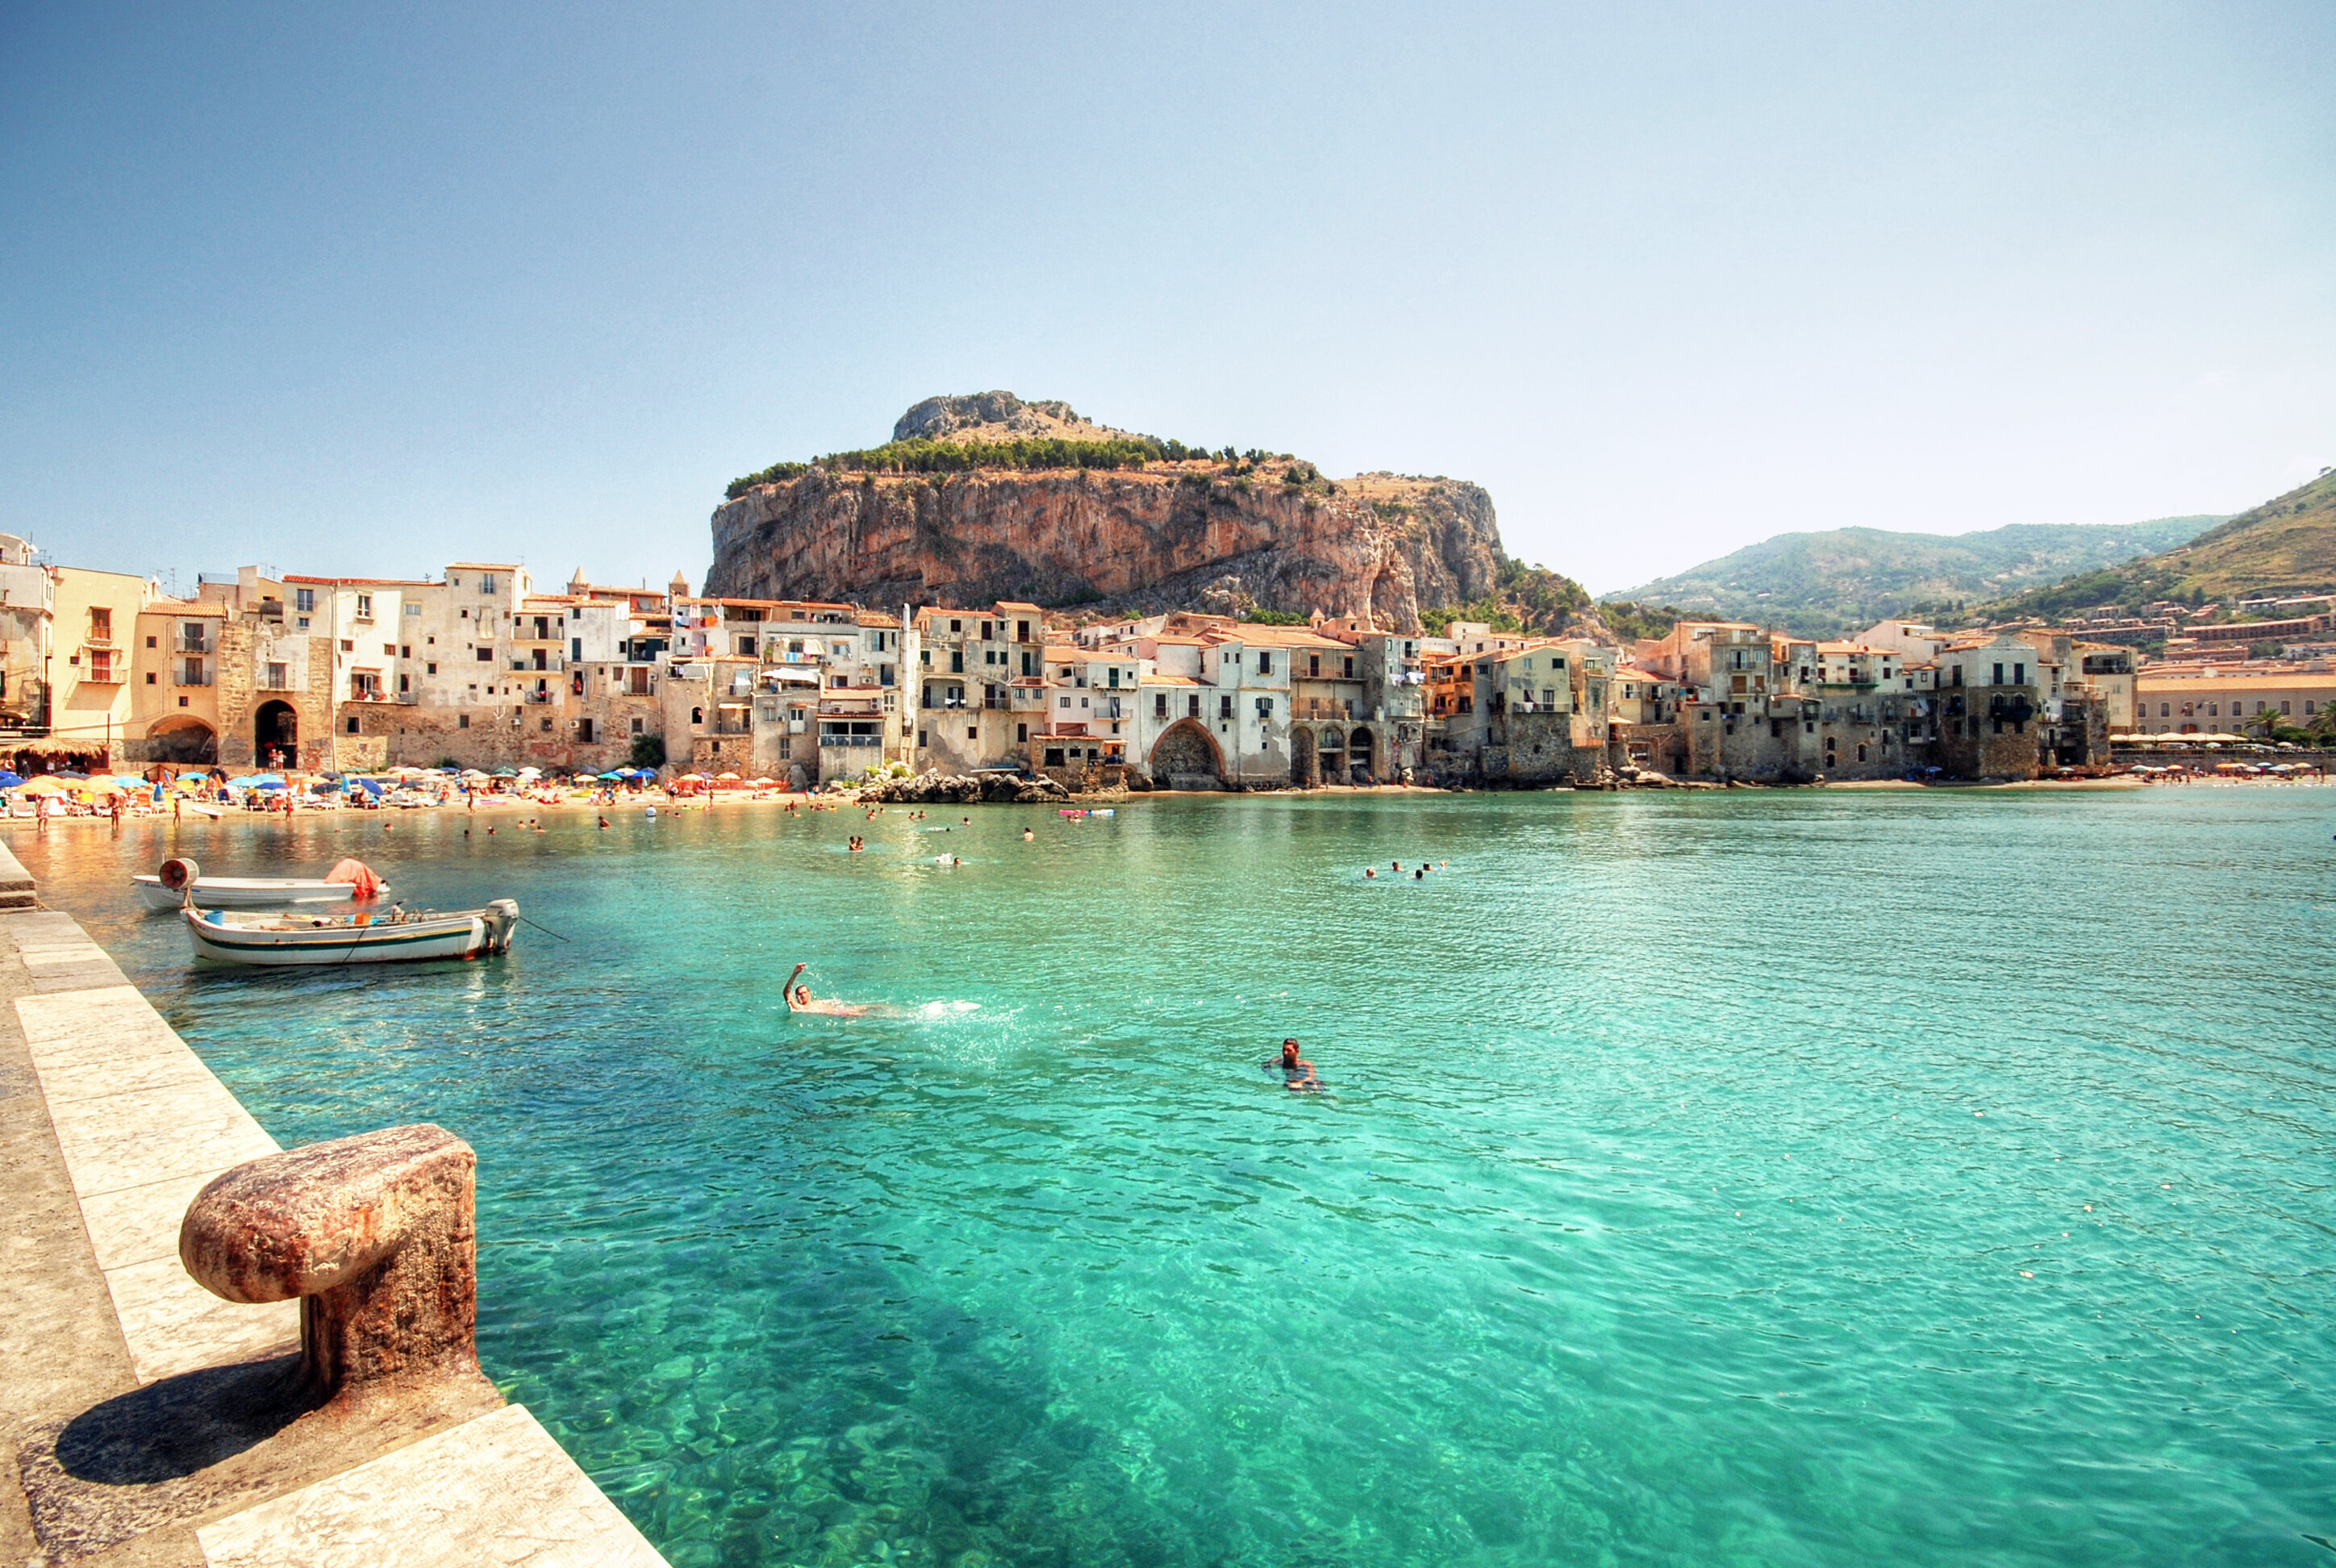 The shores of Italy